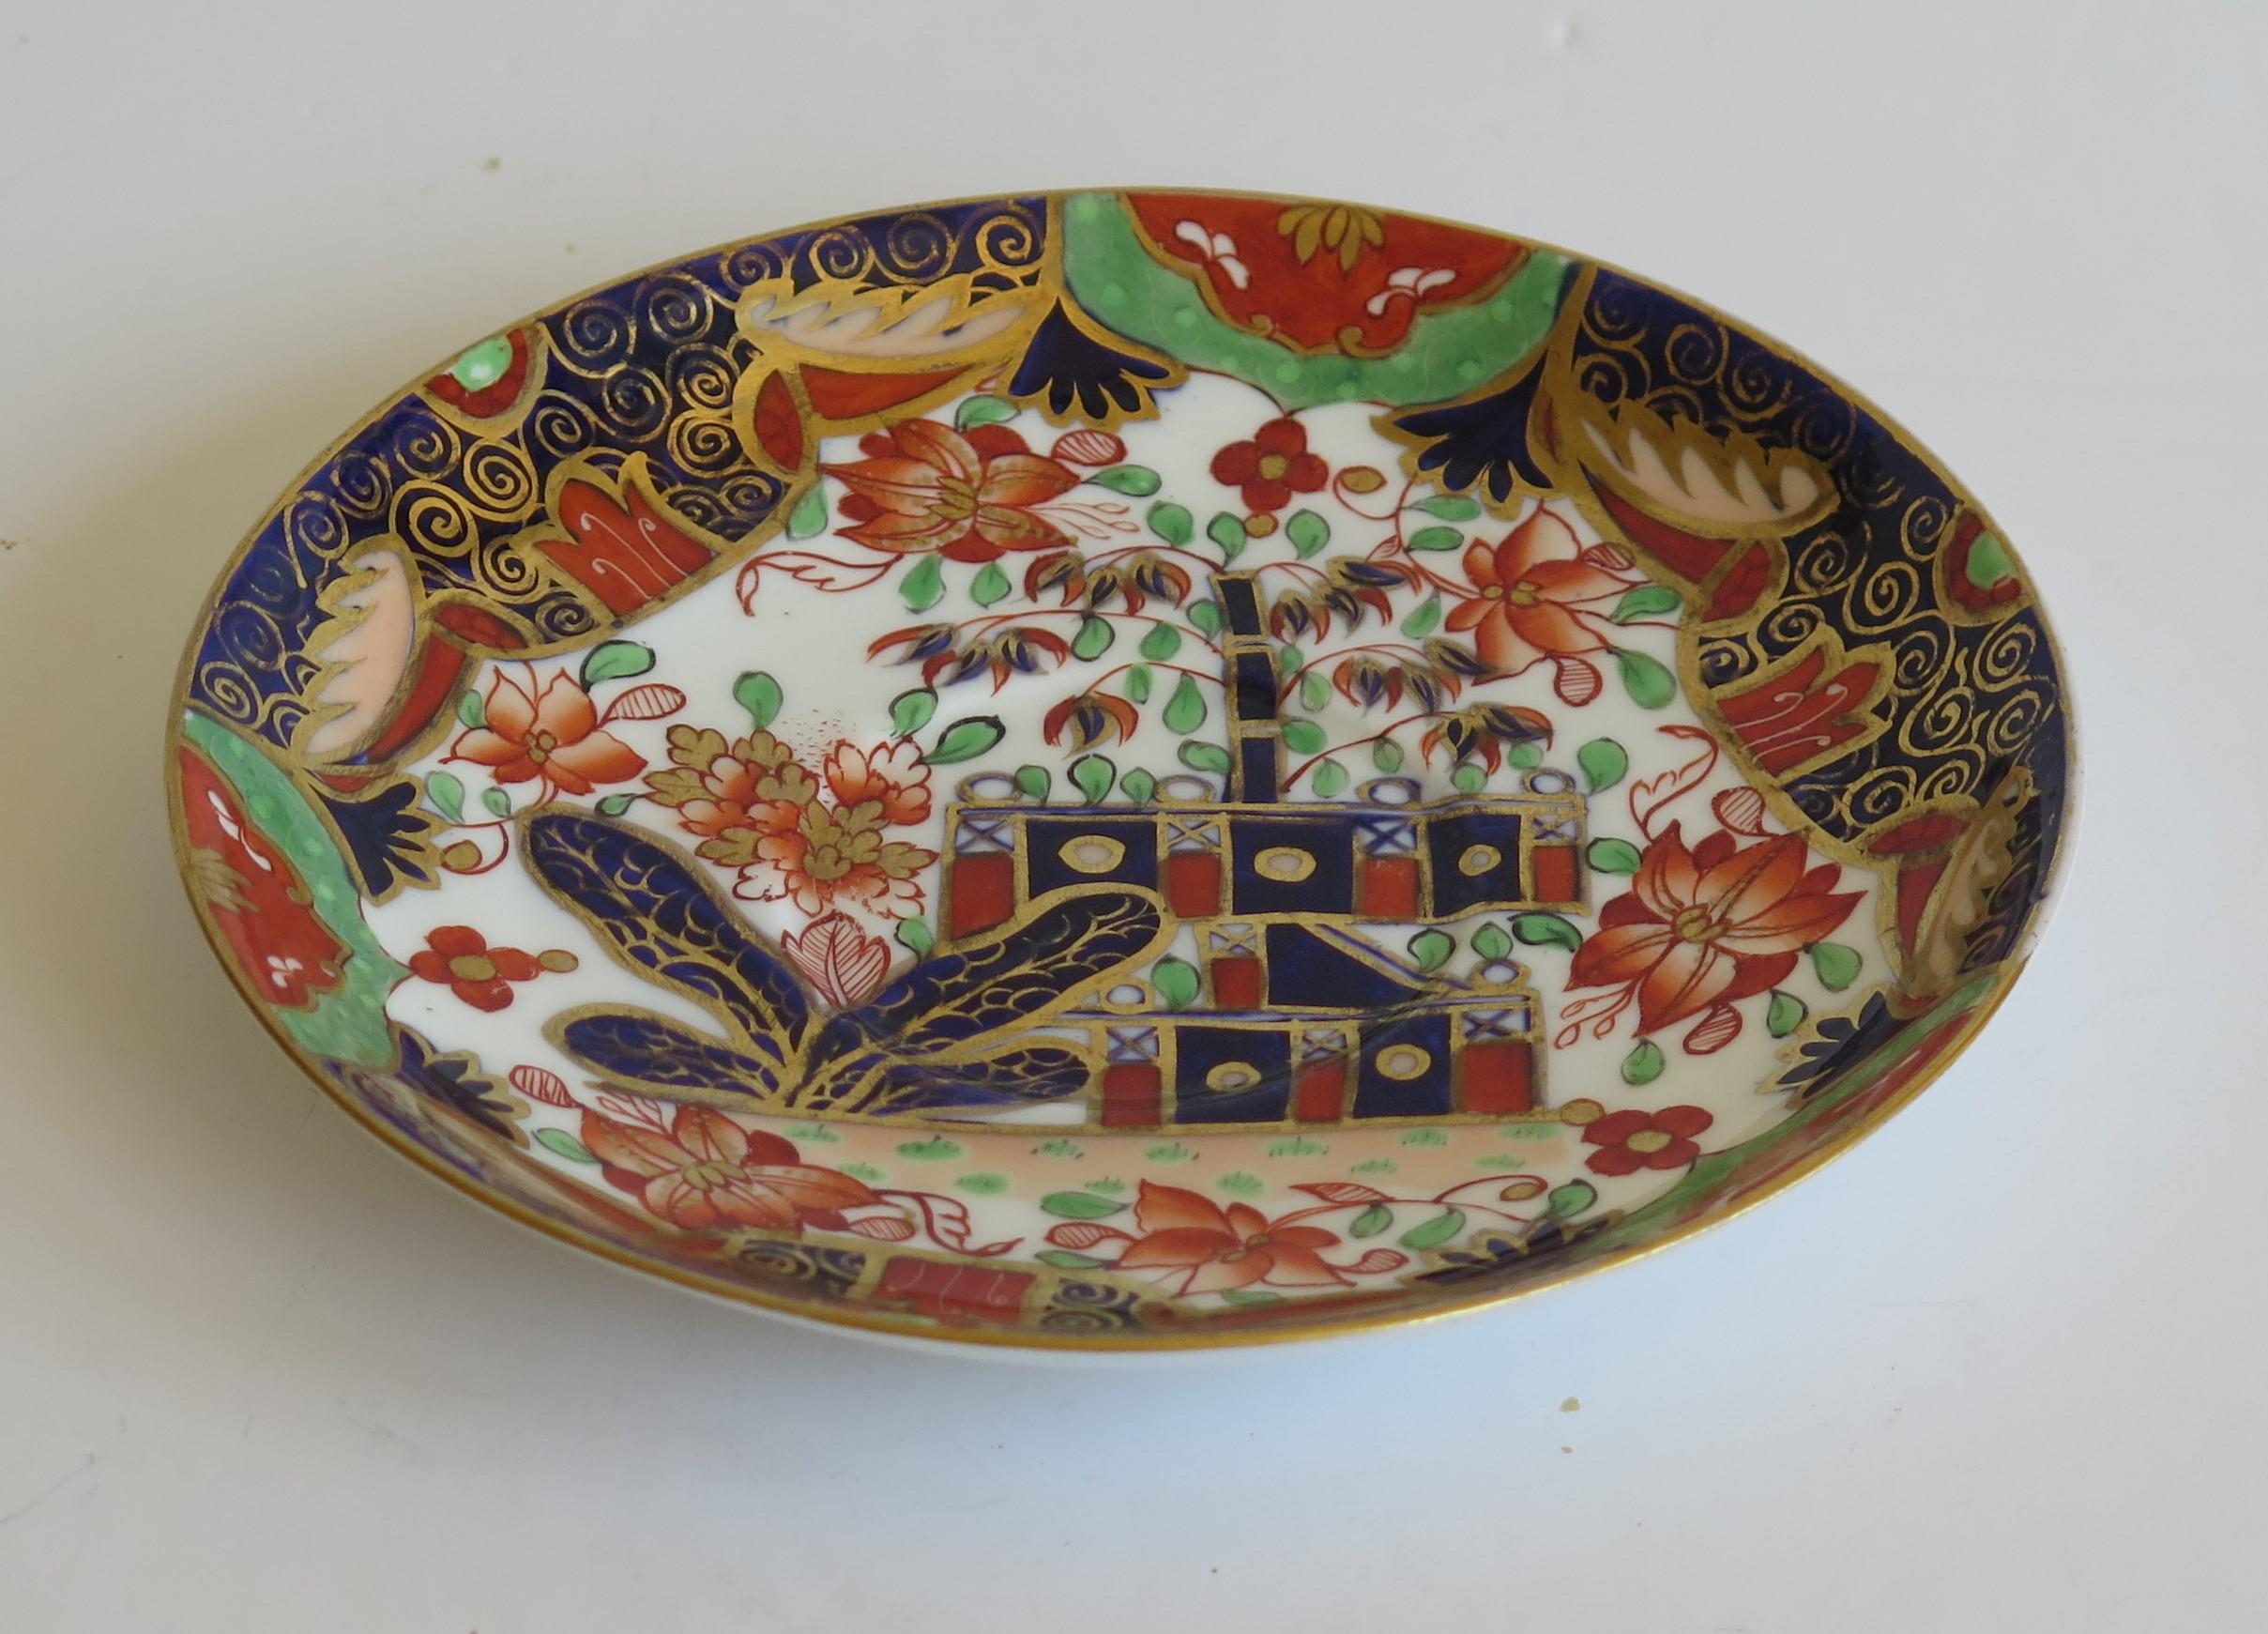 Chinoiserie Porcelain Saucer Dish by Copeland 'Spode' in Imari Fence Ptn No. 794, circa 1850